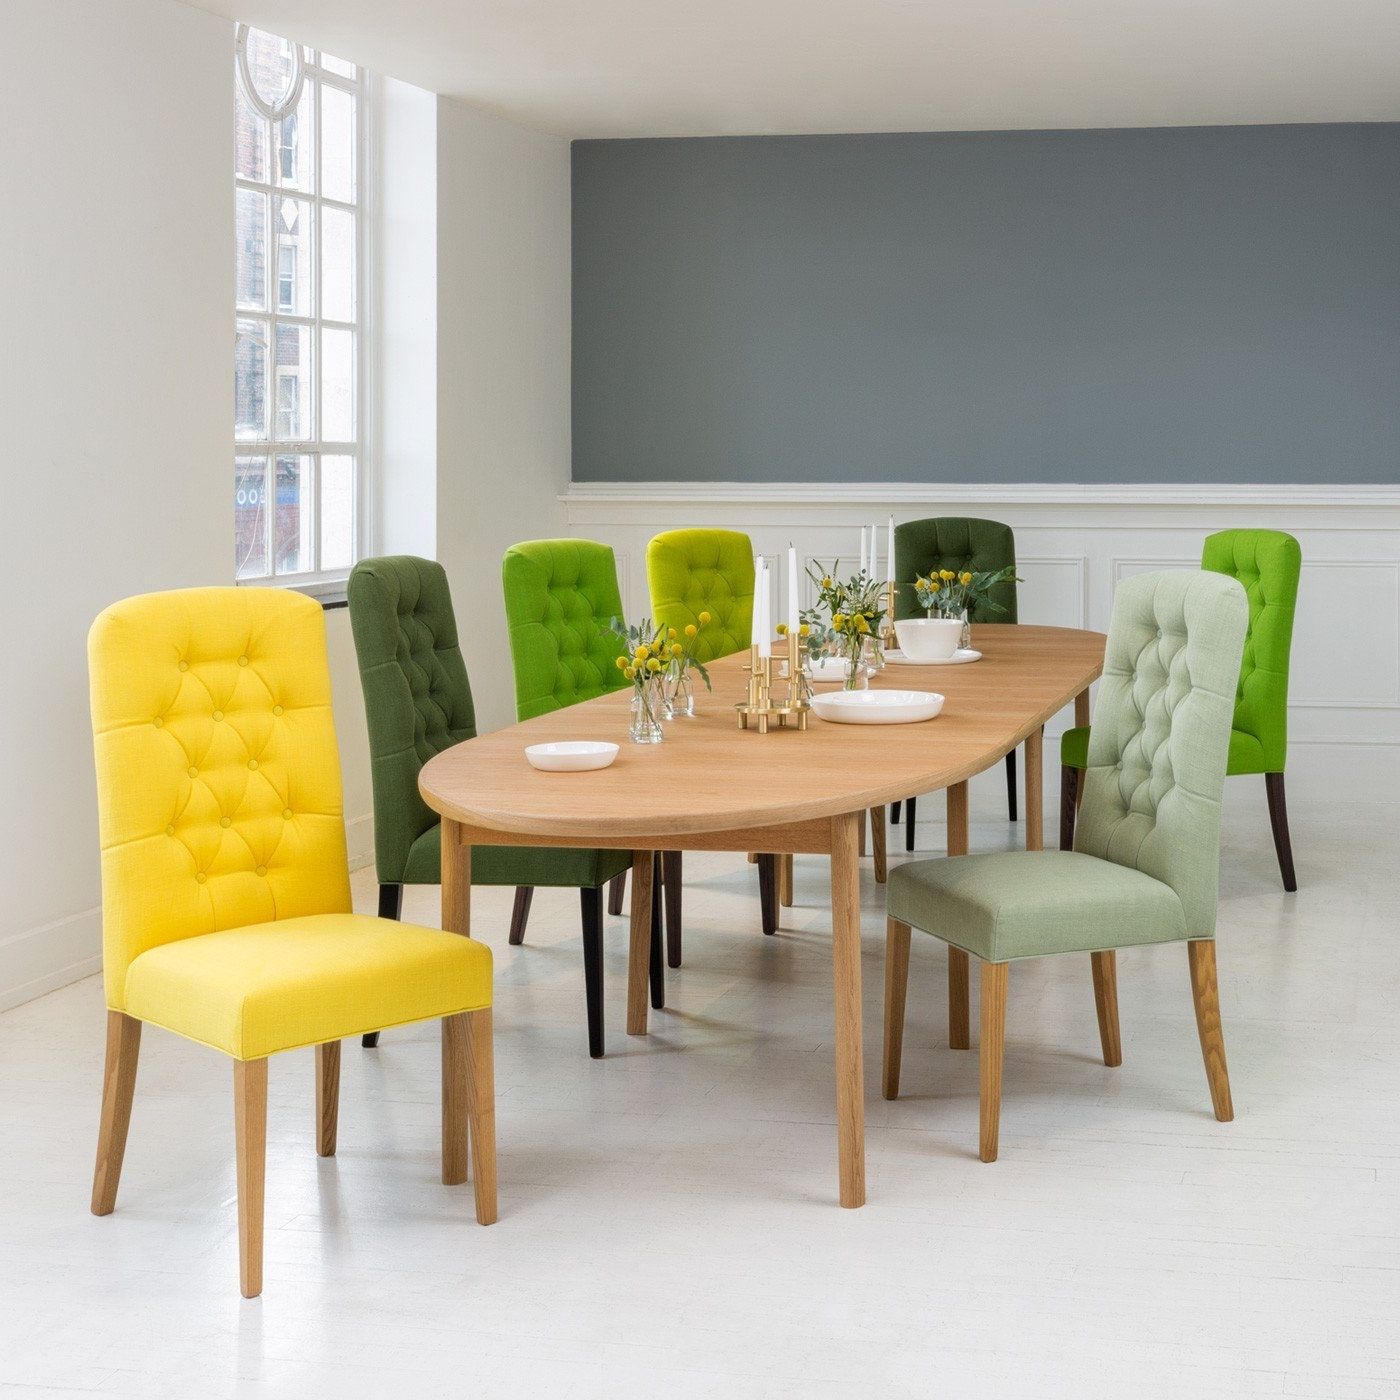 Well Known Extending Dining Tables 6 Chairs For Heal's Ellipse Extending Dining Table 6 – 10 Seater (View 23 of 25)